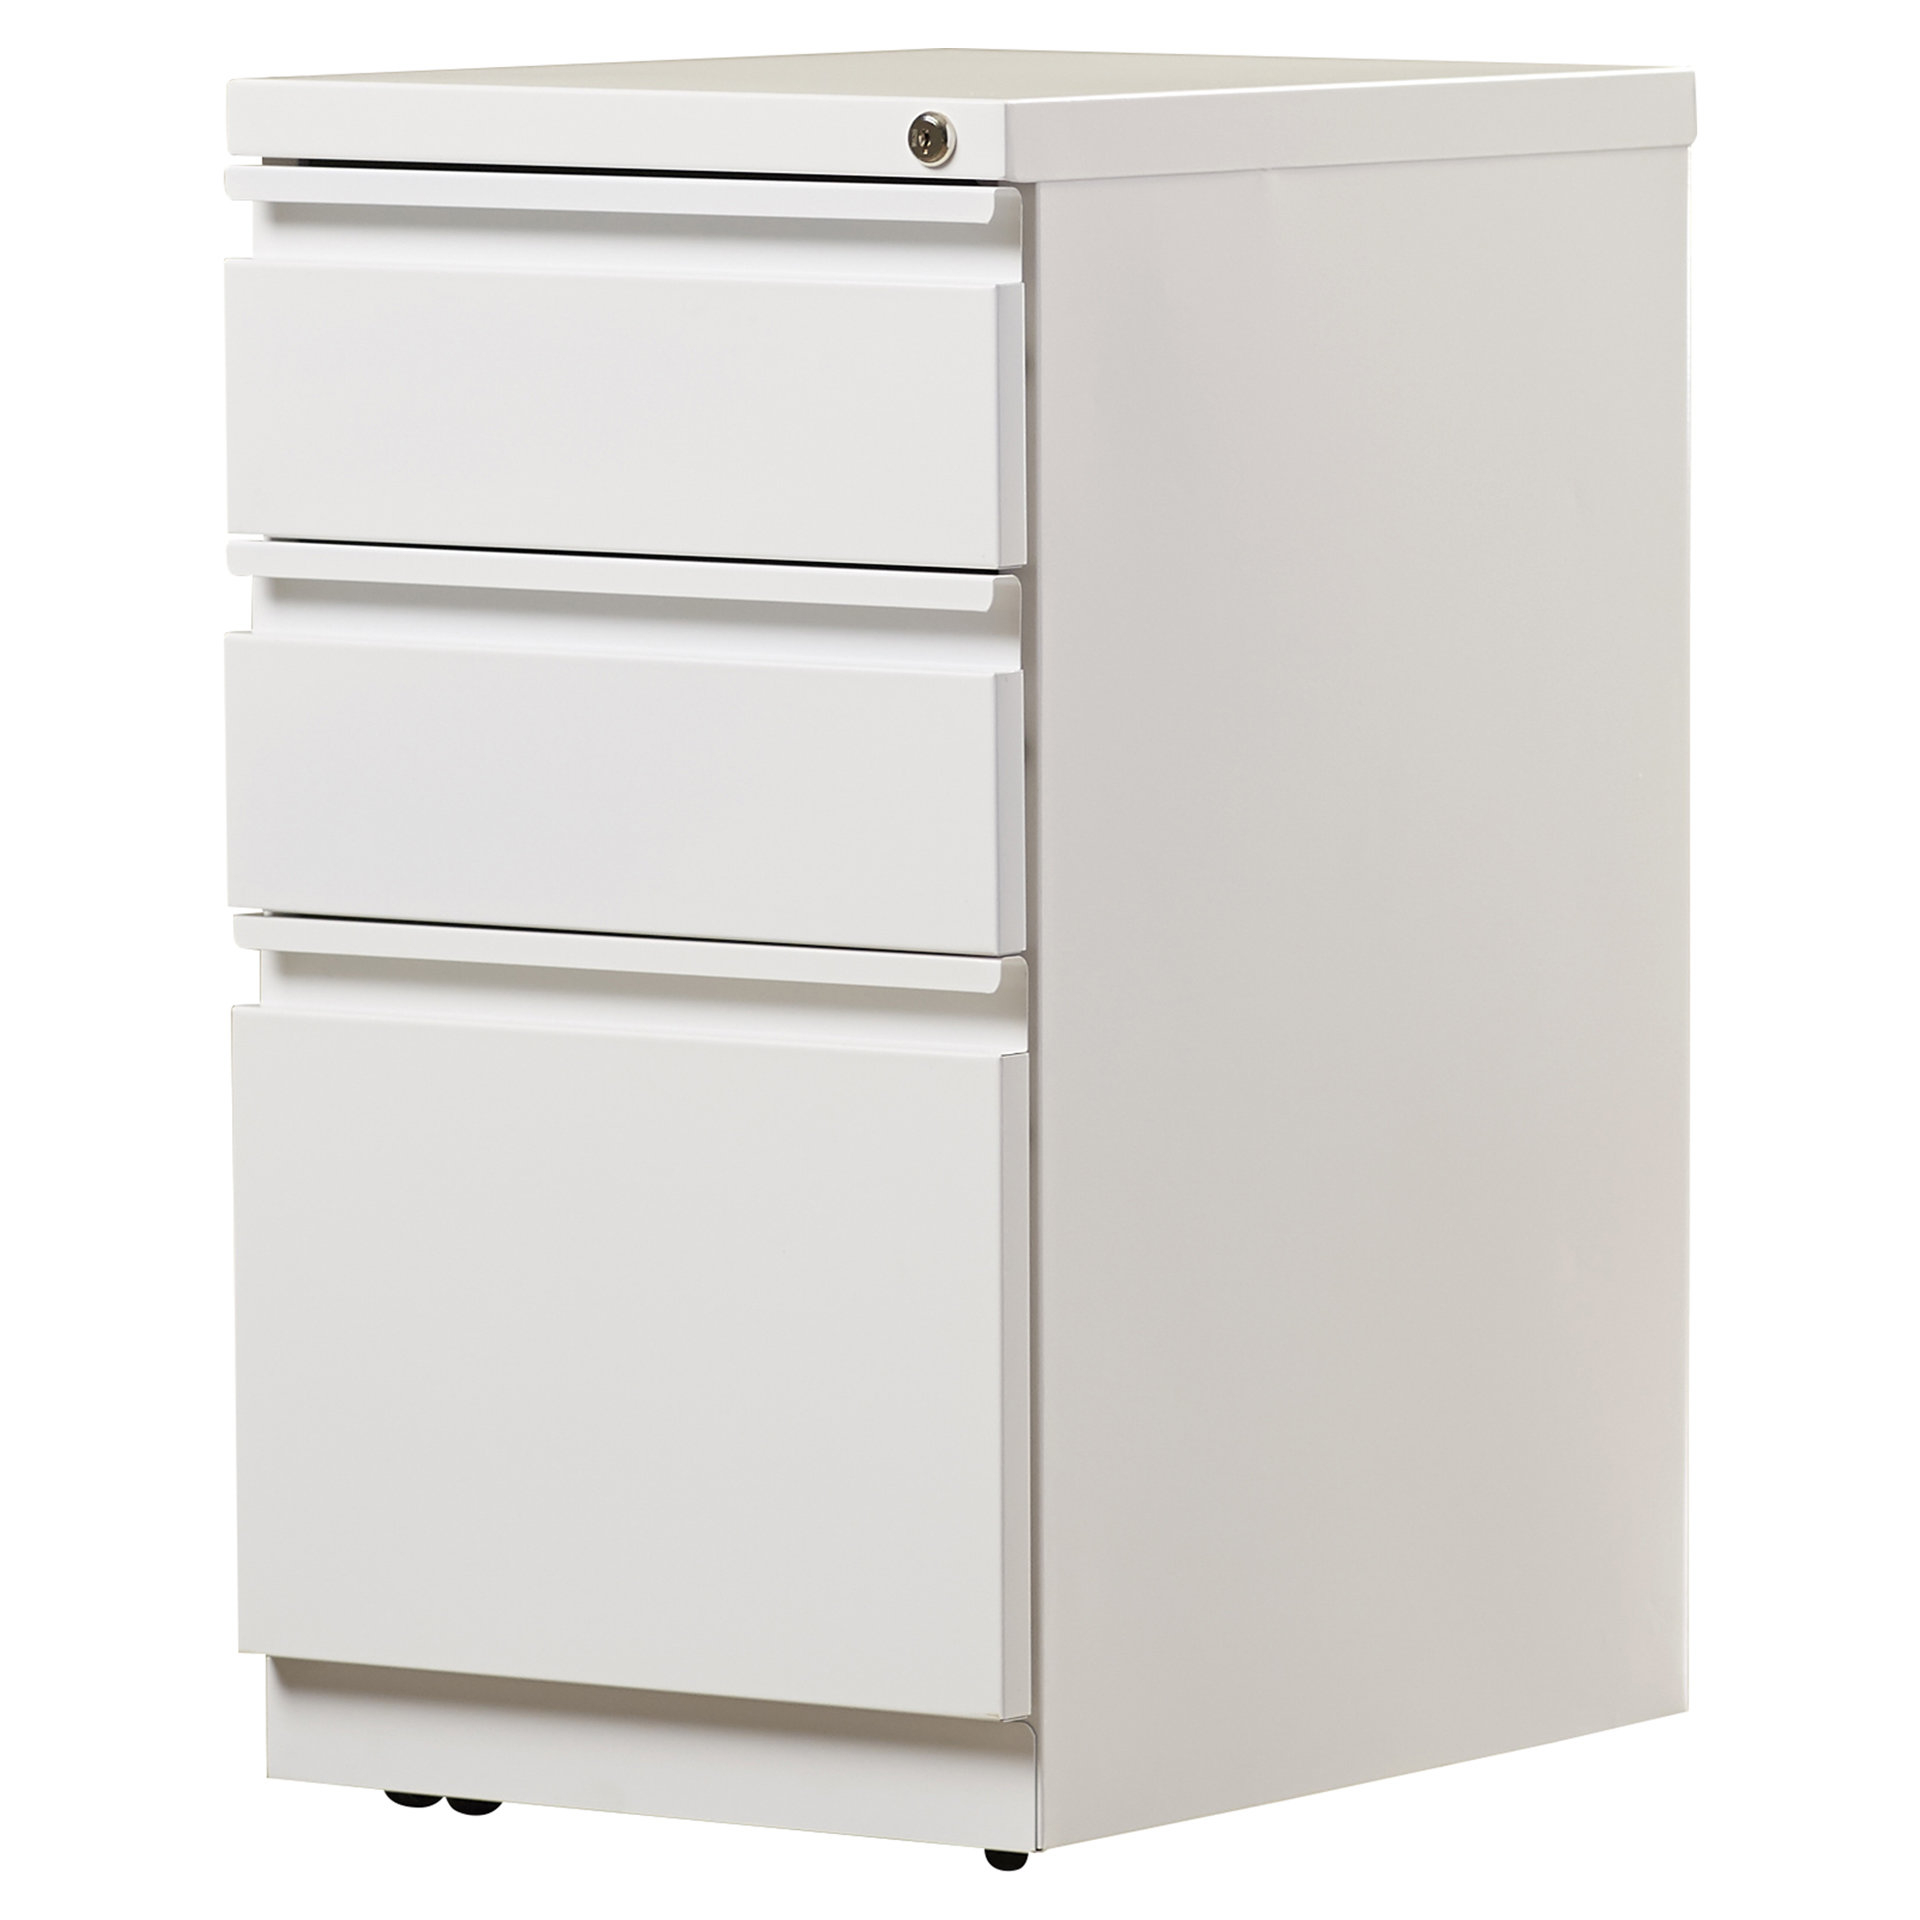 Premo 3 Drawer Vertical Filing Cabinet Reviews Allmodern within sizing 1920 X 1920